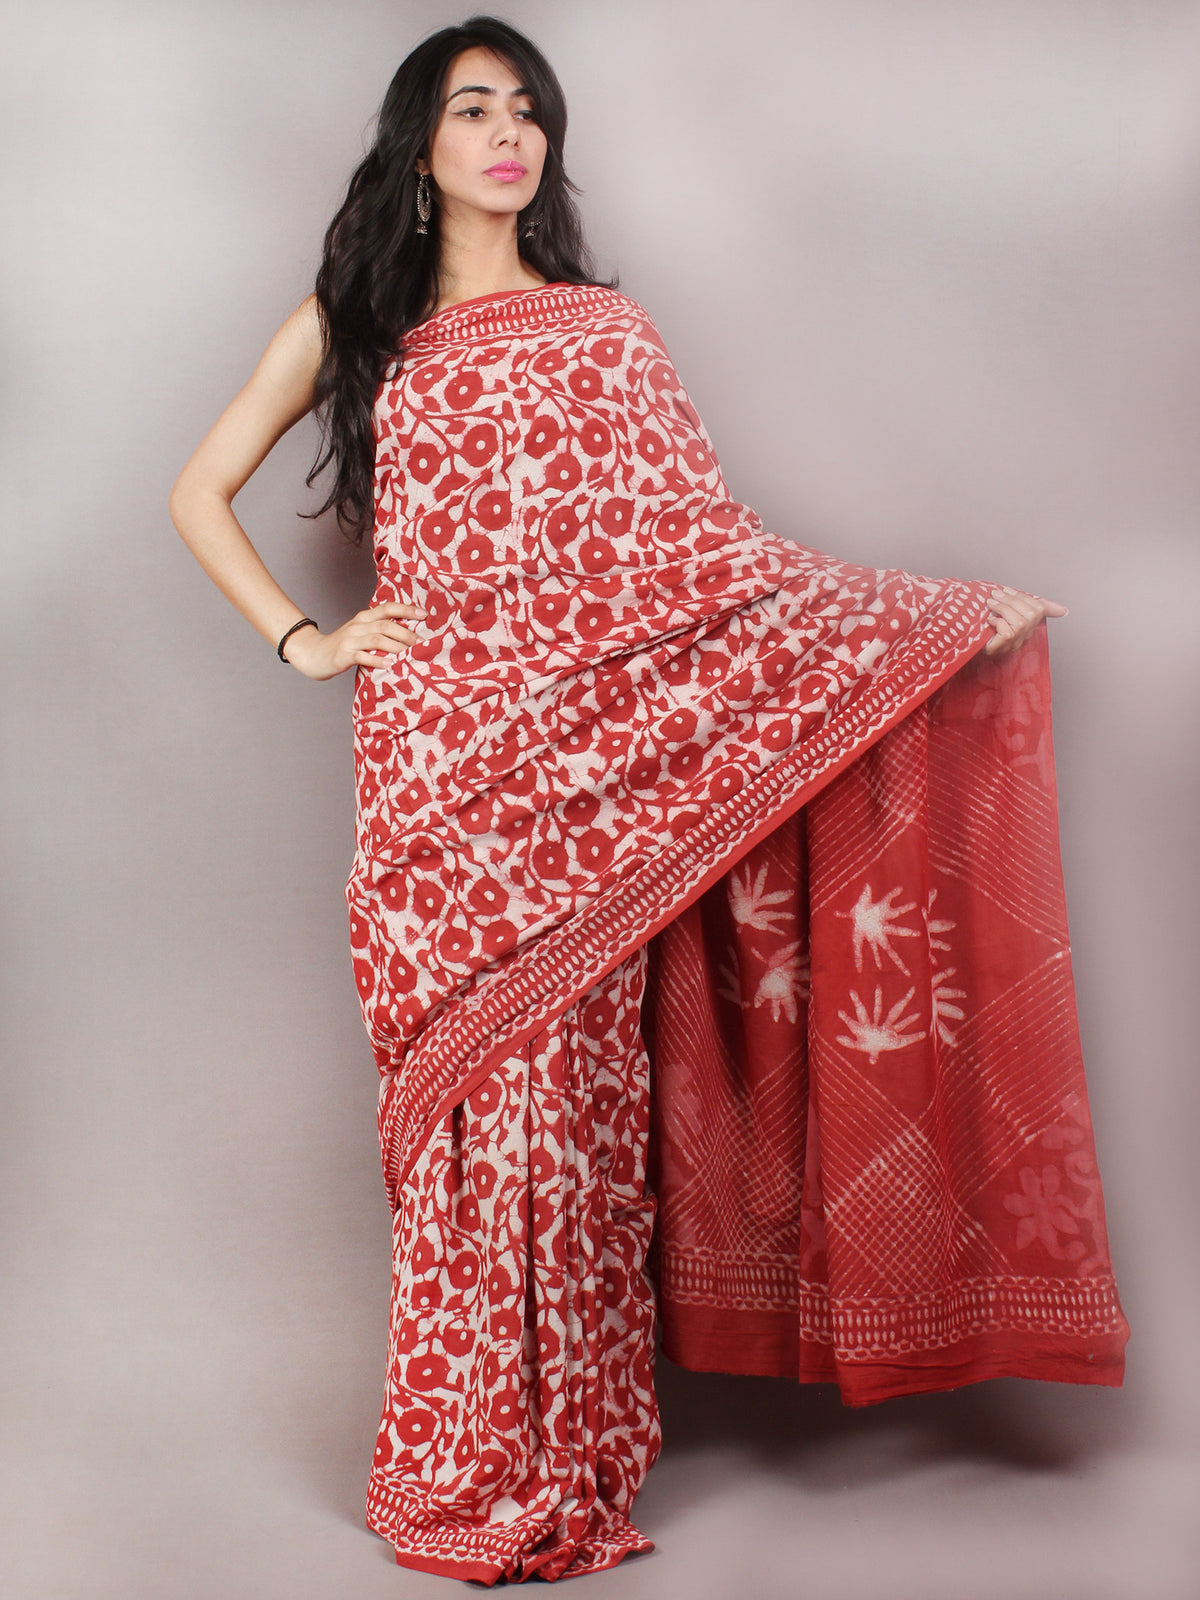 Red Beige Hand Block Printed in Natural Colors Cotton Mul Saree - S03170753